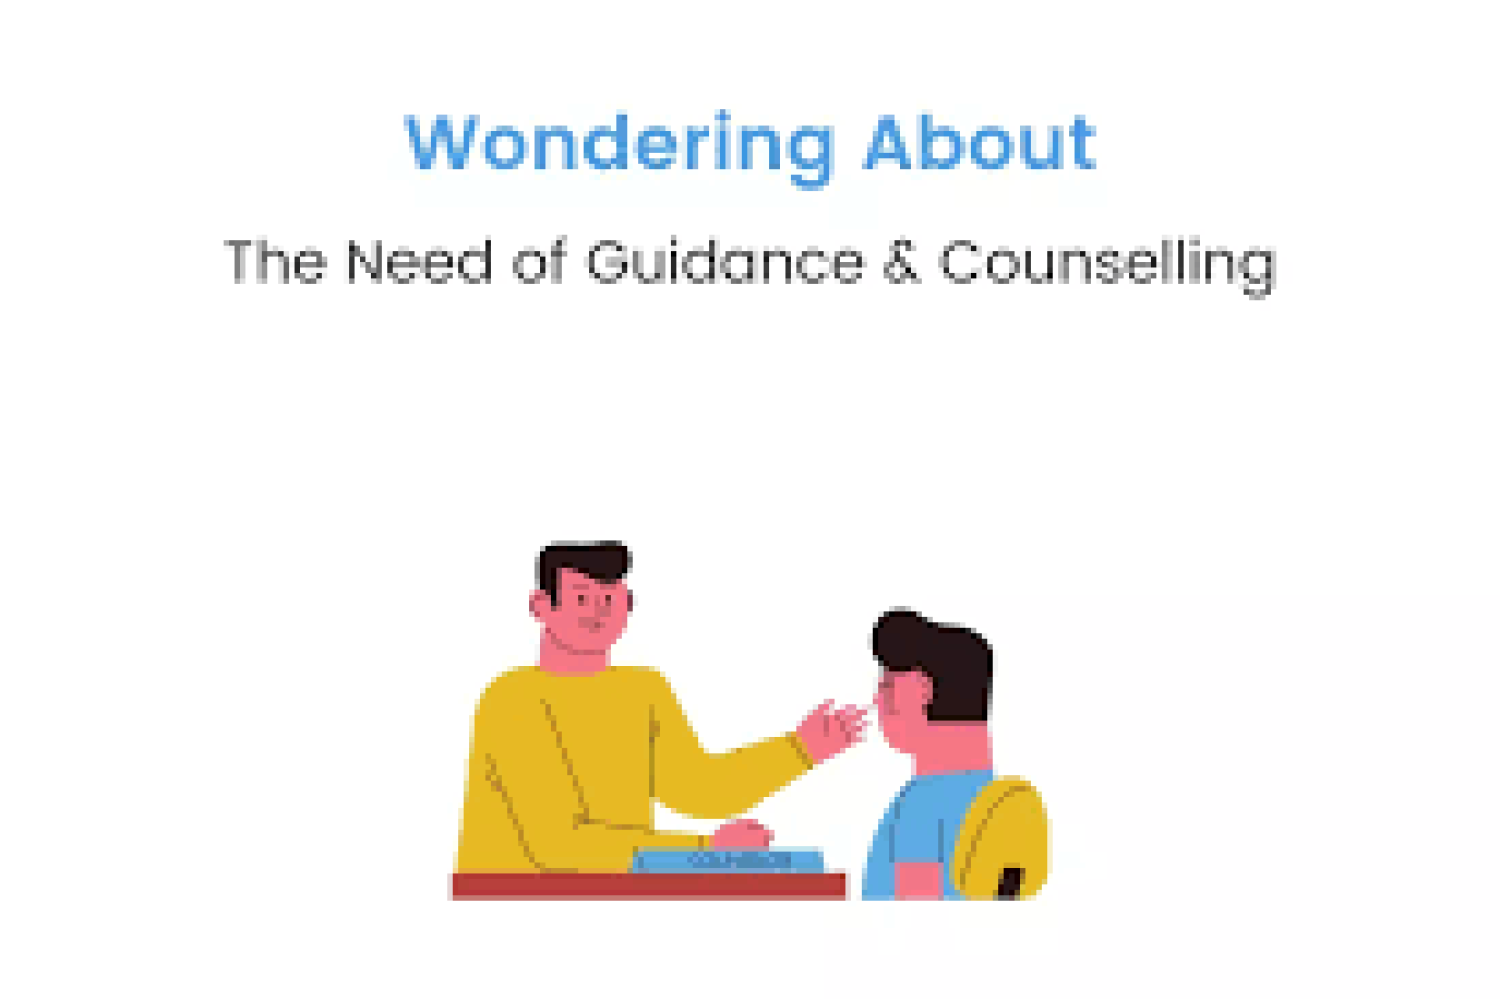 I will offer counseling, support, guidance